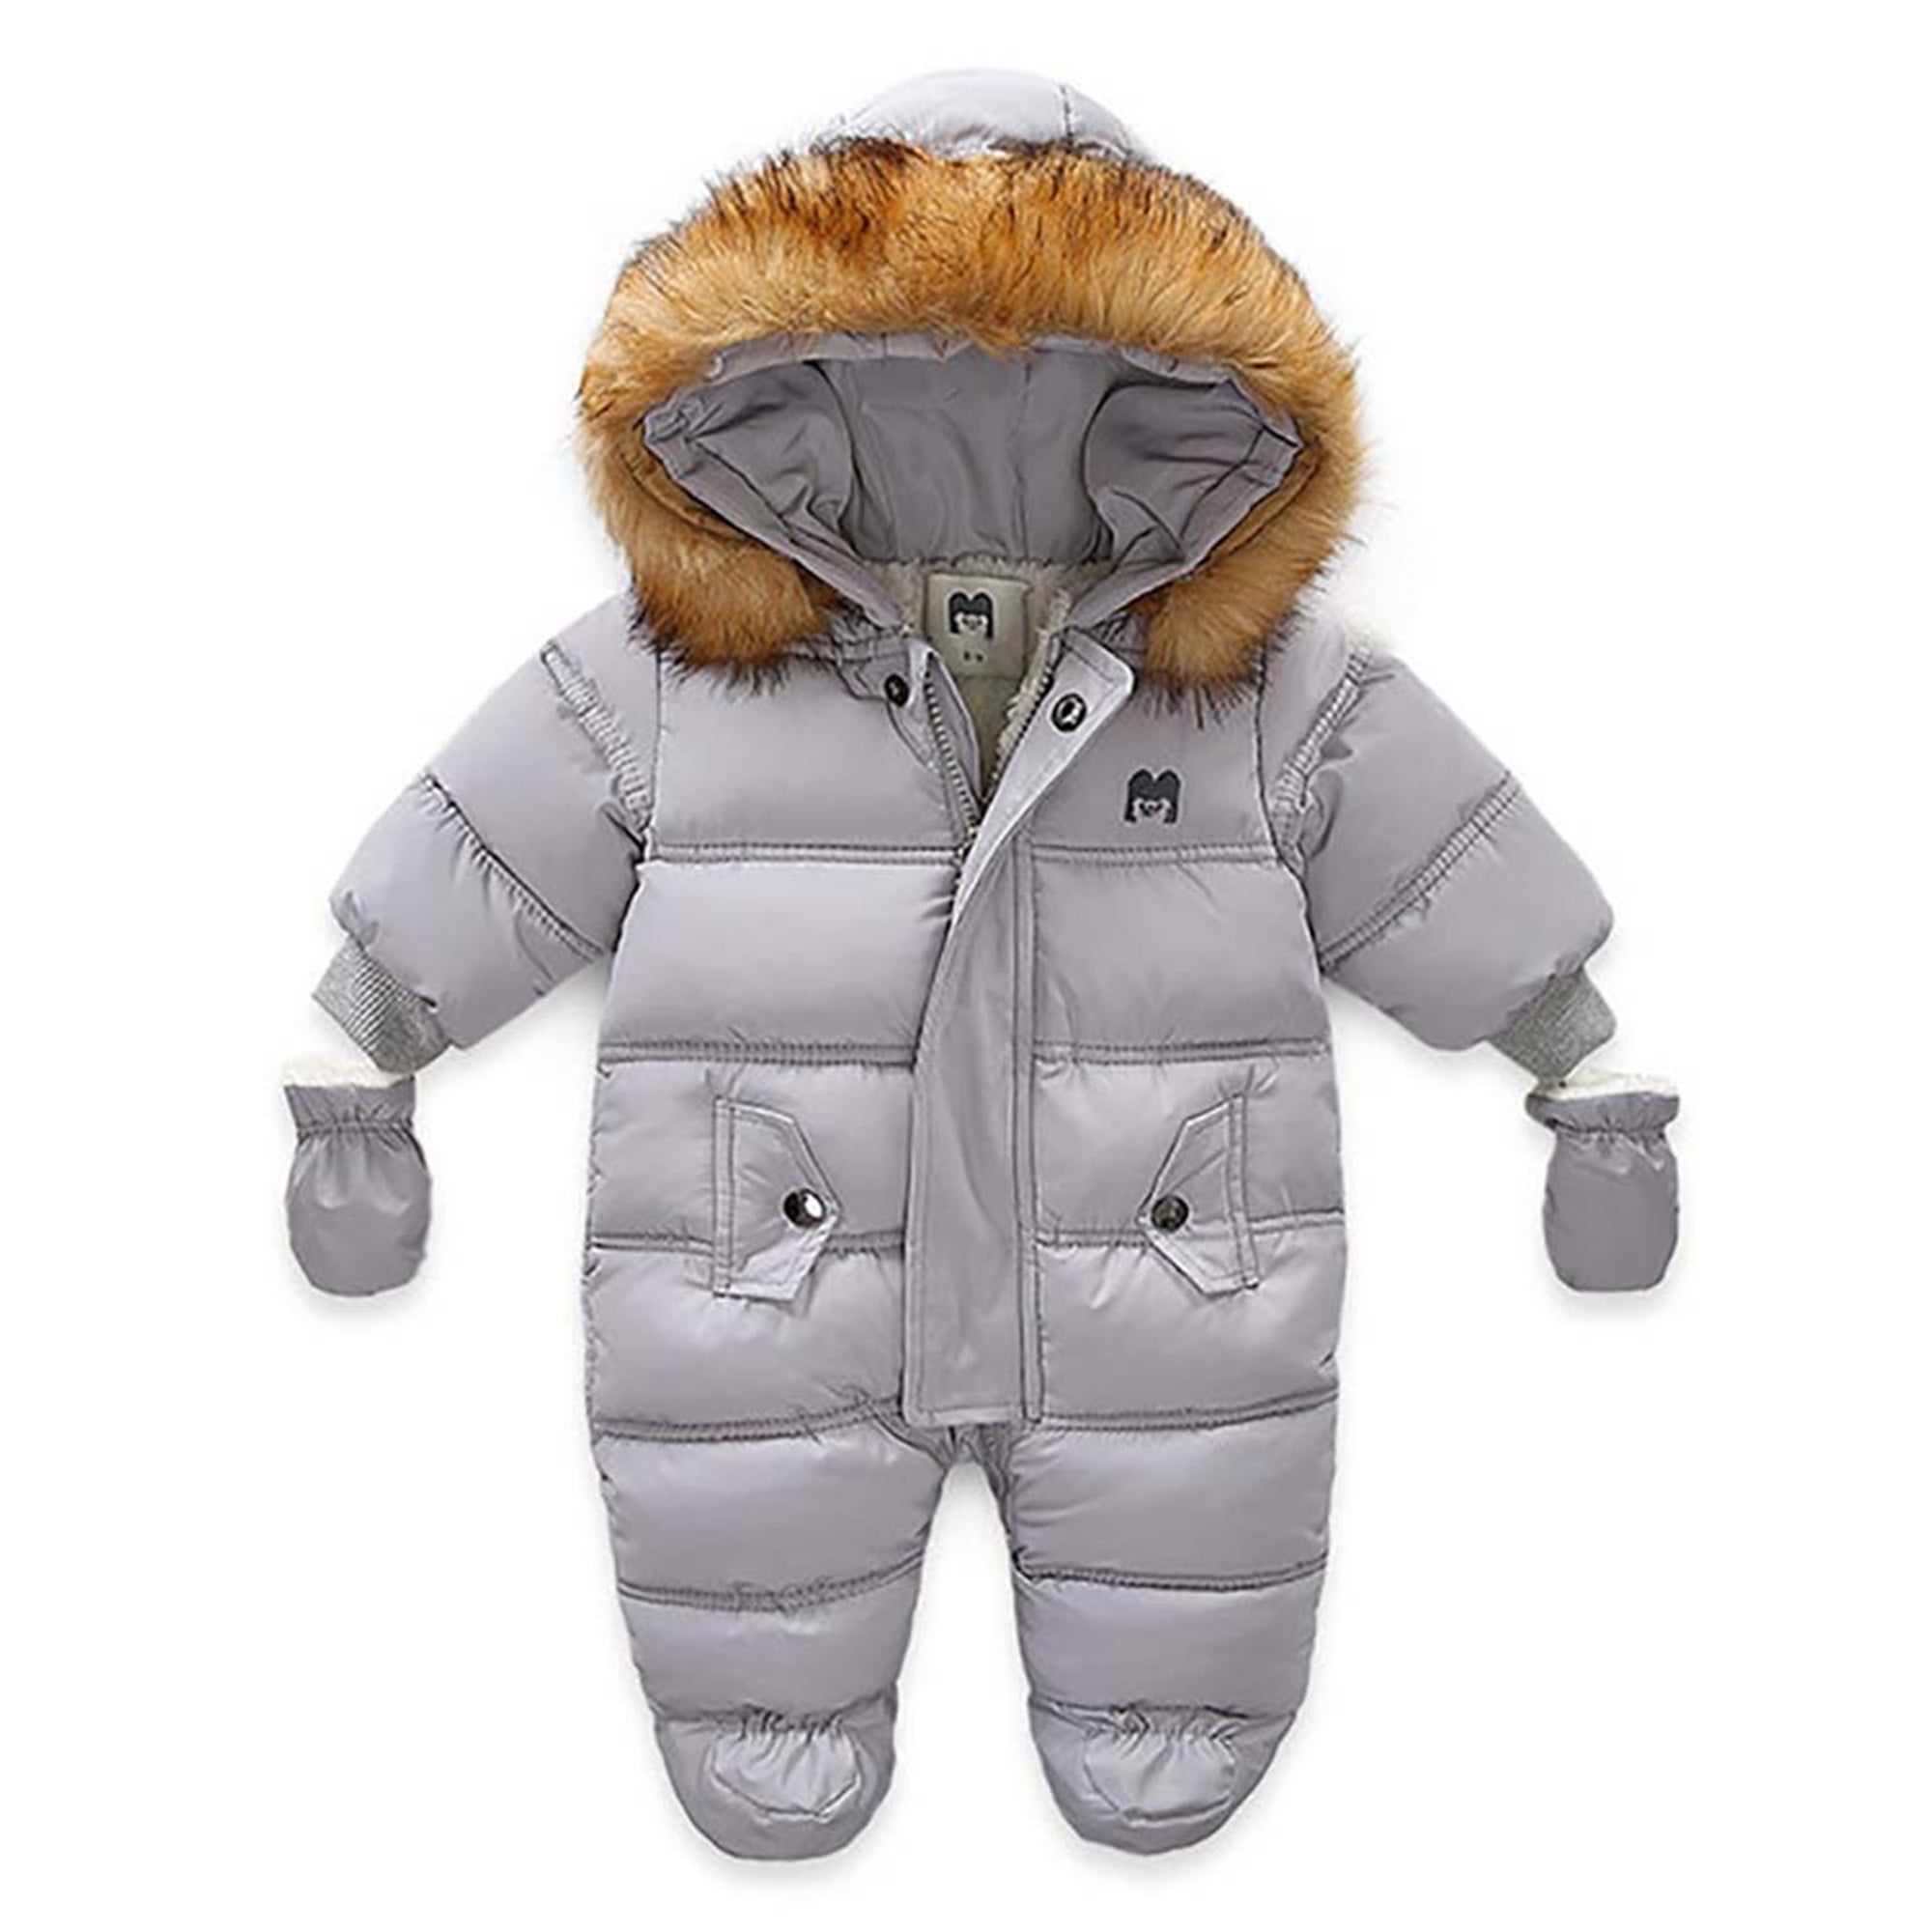 Simplee kids Baby Infant Boys Girls Snowsuit Winter Hooded Footed Warm Jumpsuit Outerwear with Gloves for 3-24 Months 